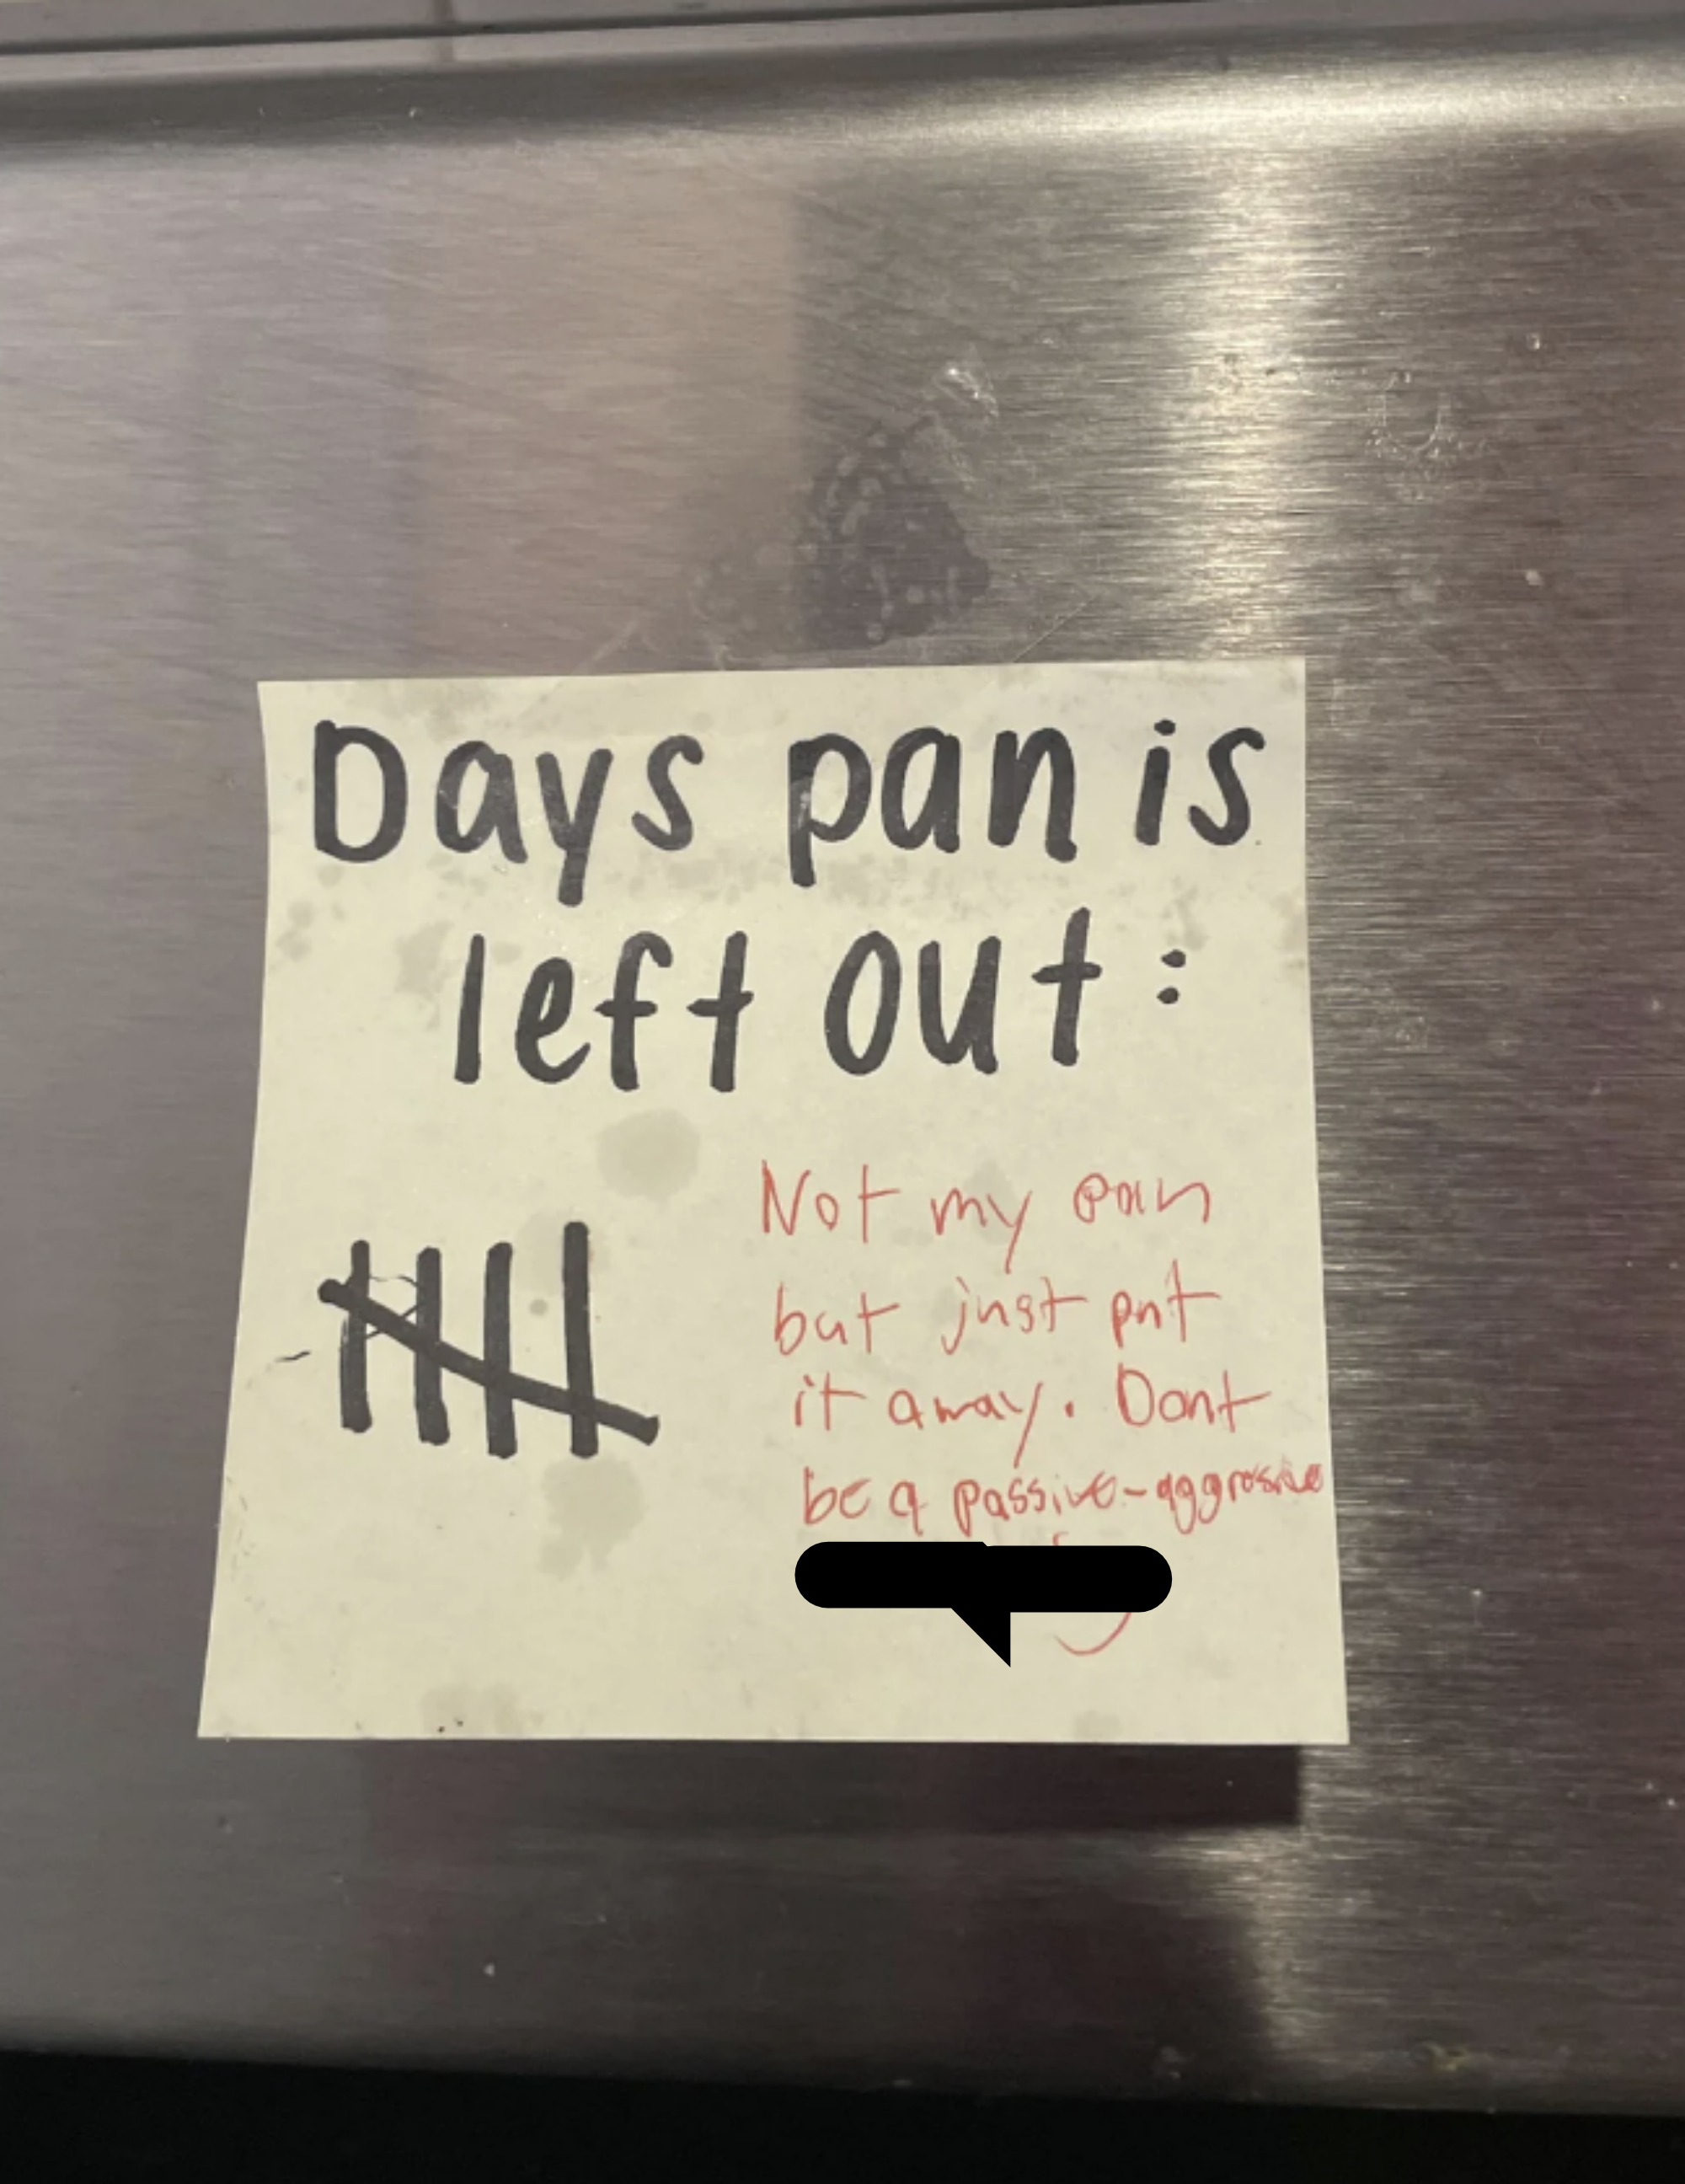 Note with tallies counting days a pan is left out, asking not to be passive-aggressive and wash it